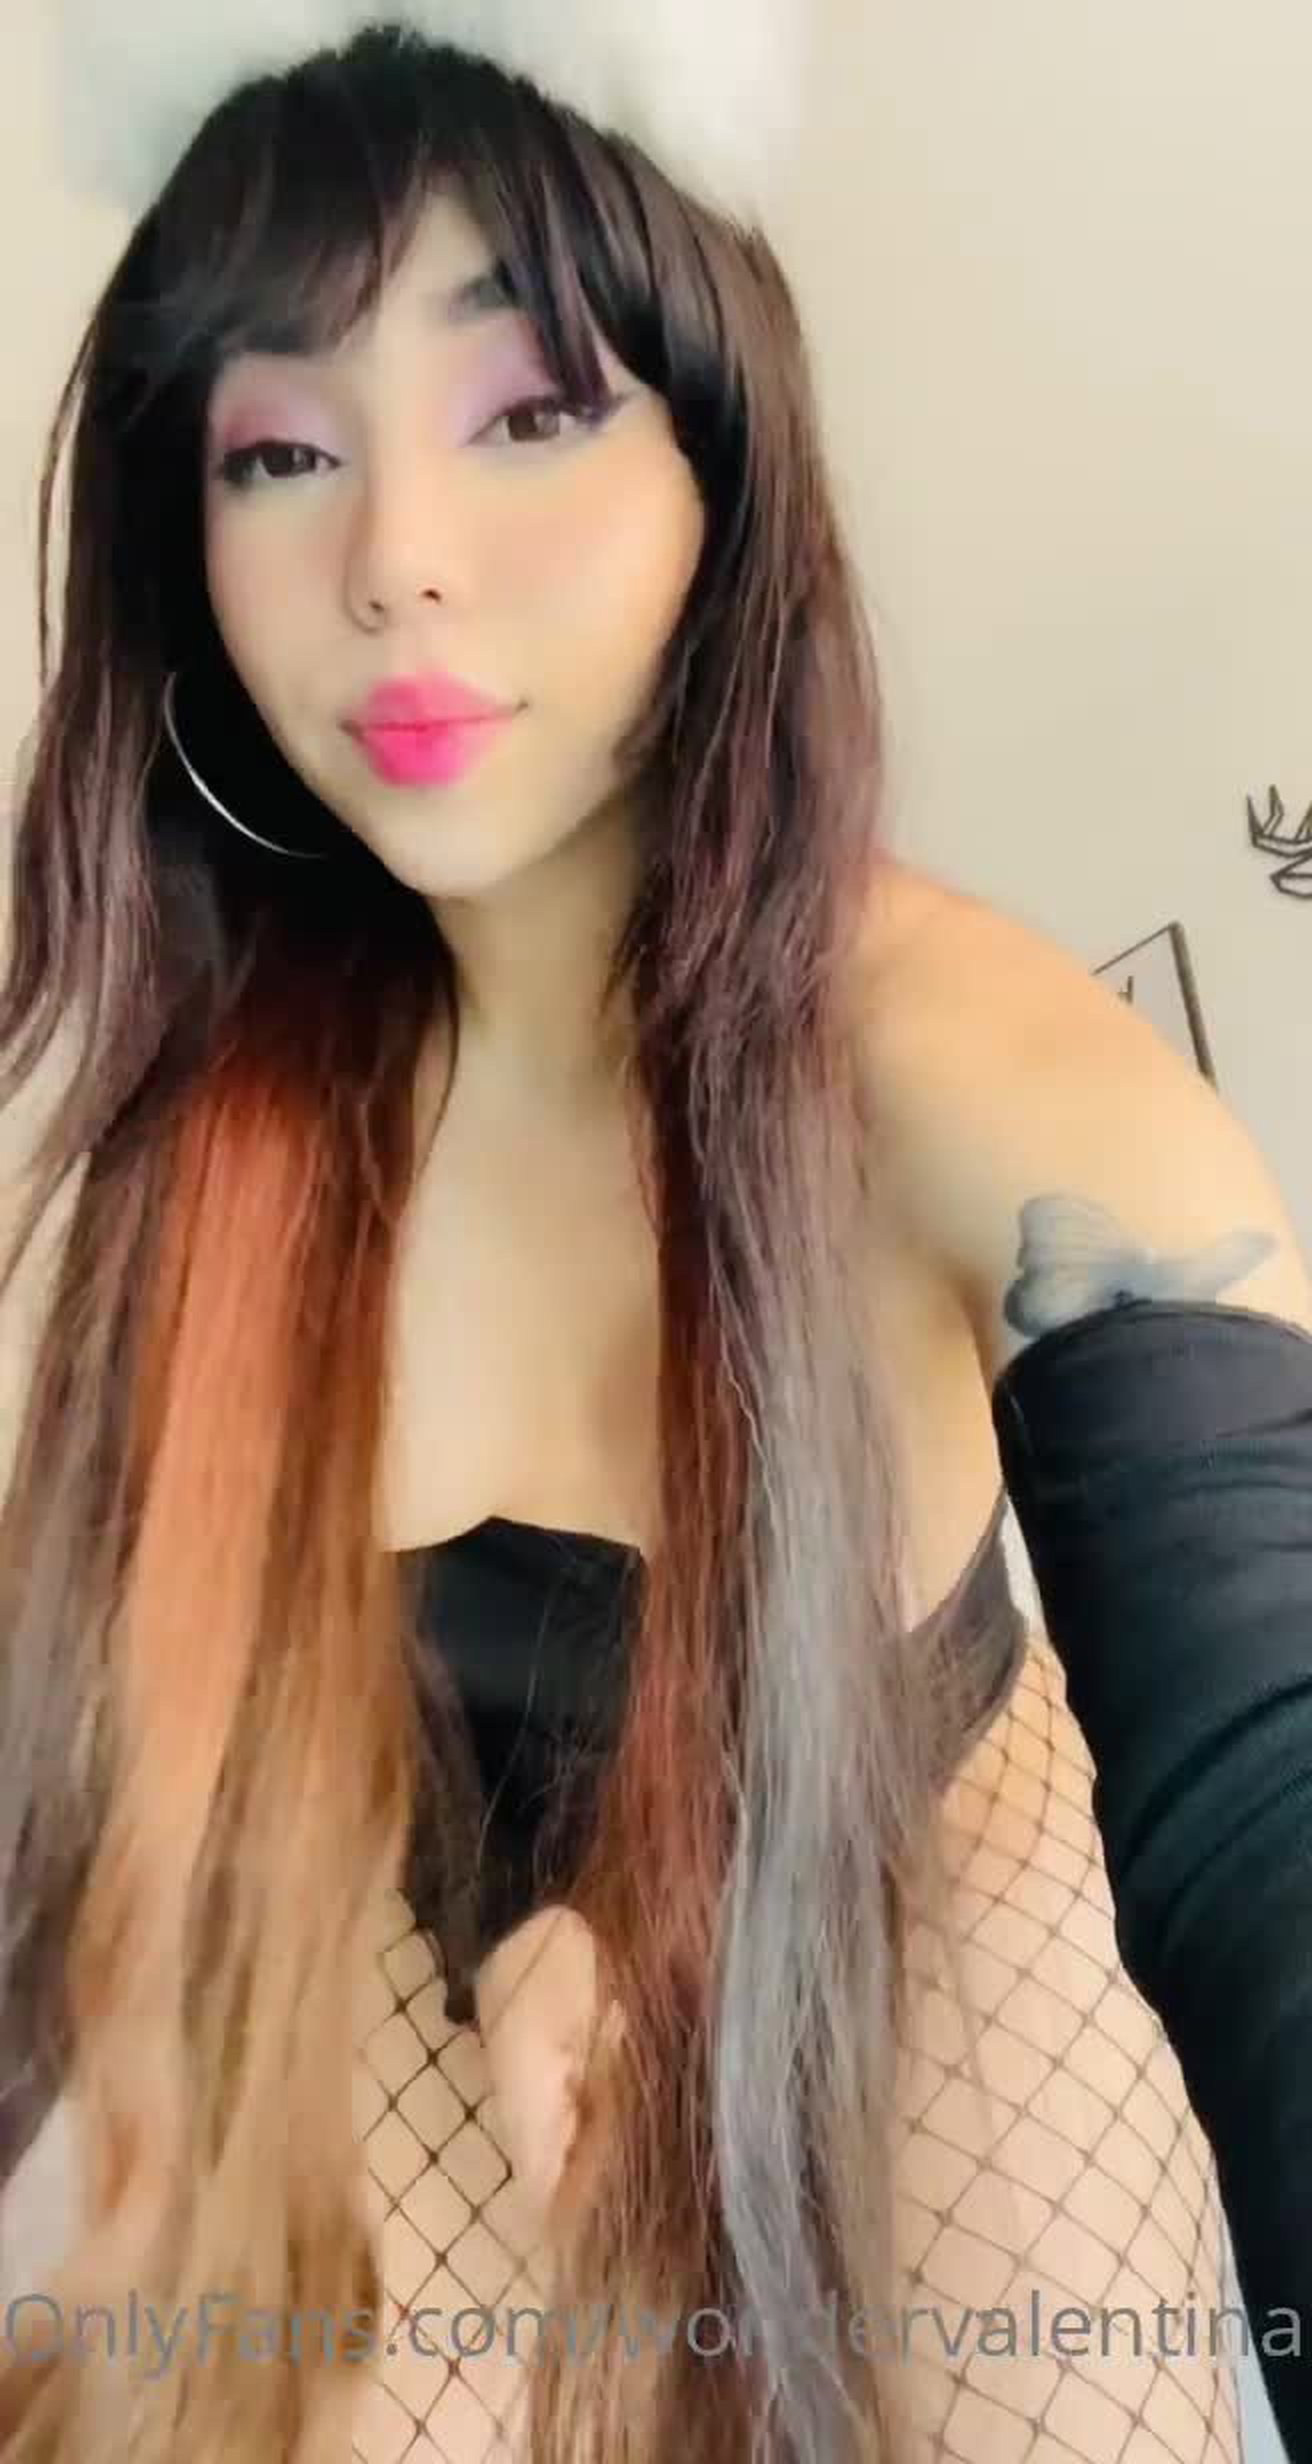 Shared Video by ShemaleCockLover with the username @ShemaleCockLover, who is a verified user,  April 19, 2024 at 8:17 PM. The post is about the topic Shemales Cumming